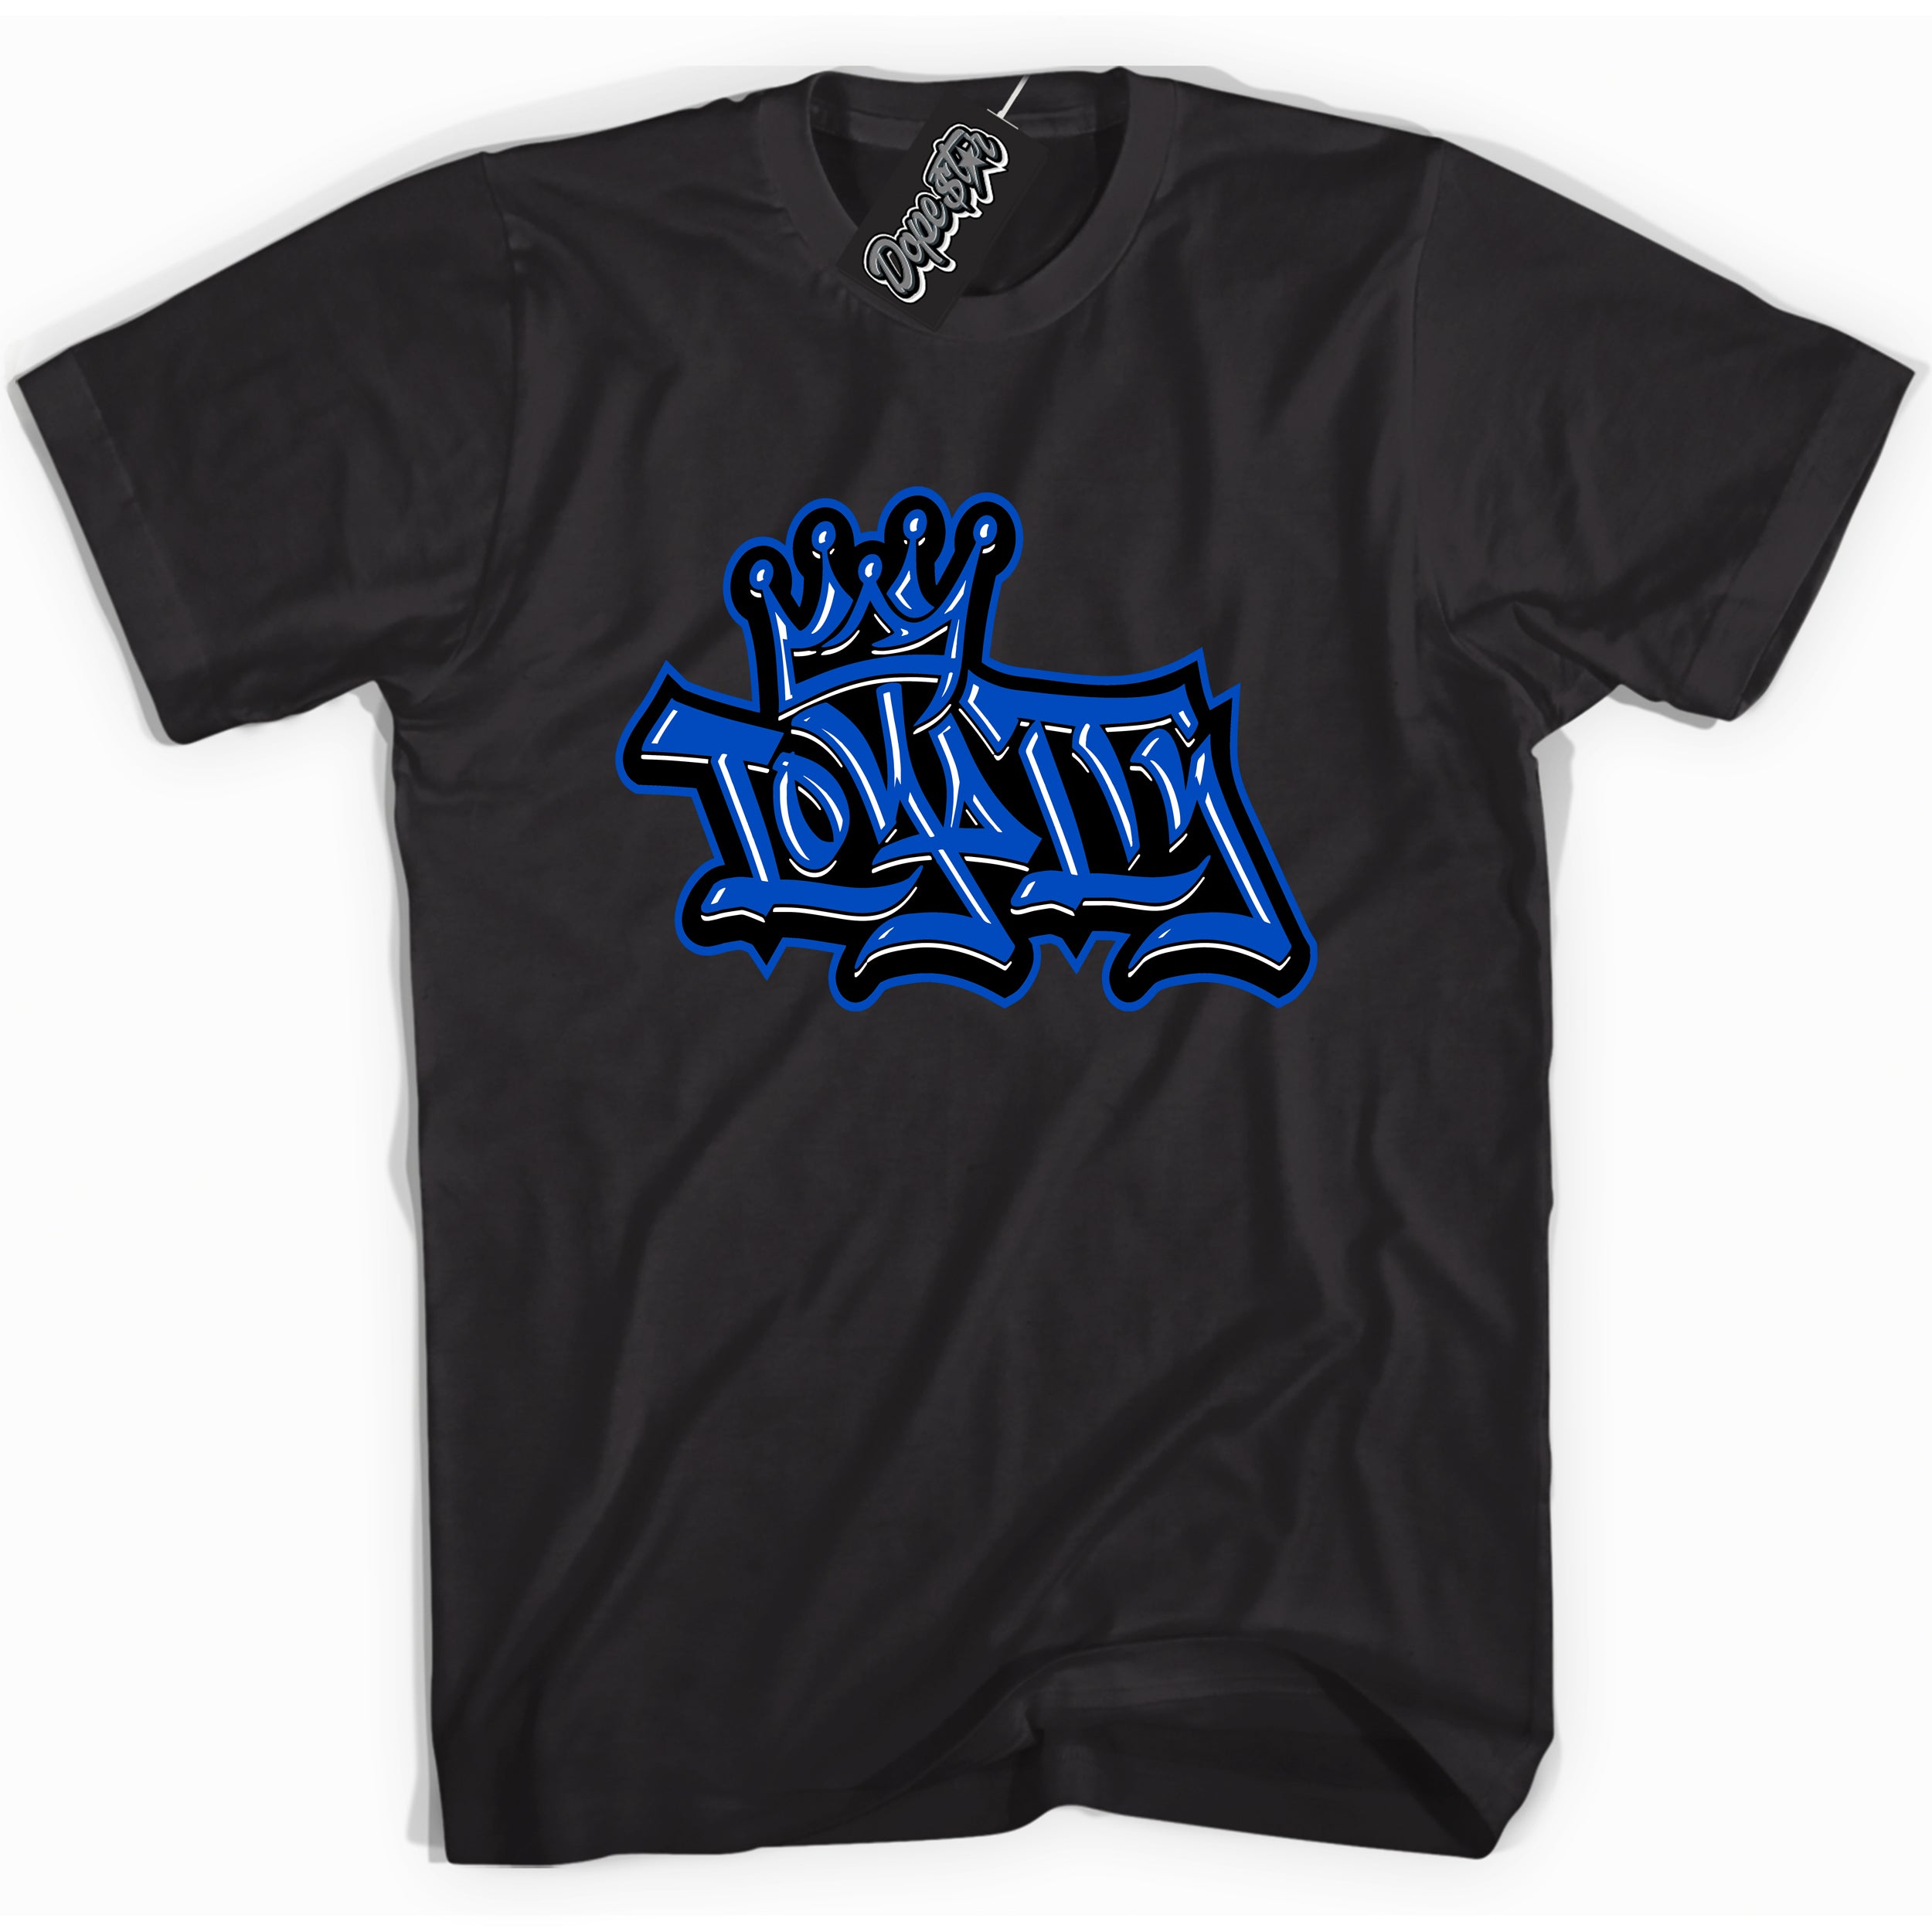 Cool Black graphic tee with Loyalty Crown print, that perfectly matches OG Royal Reimagined 1s sneakers 